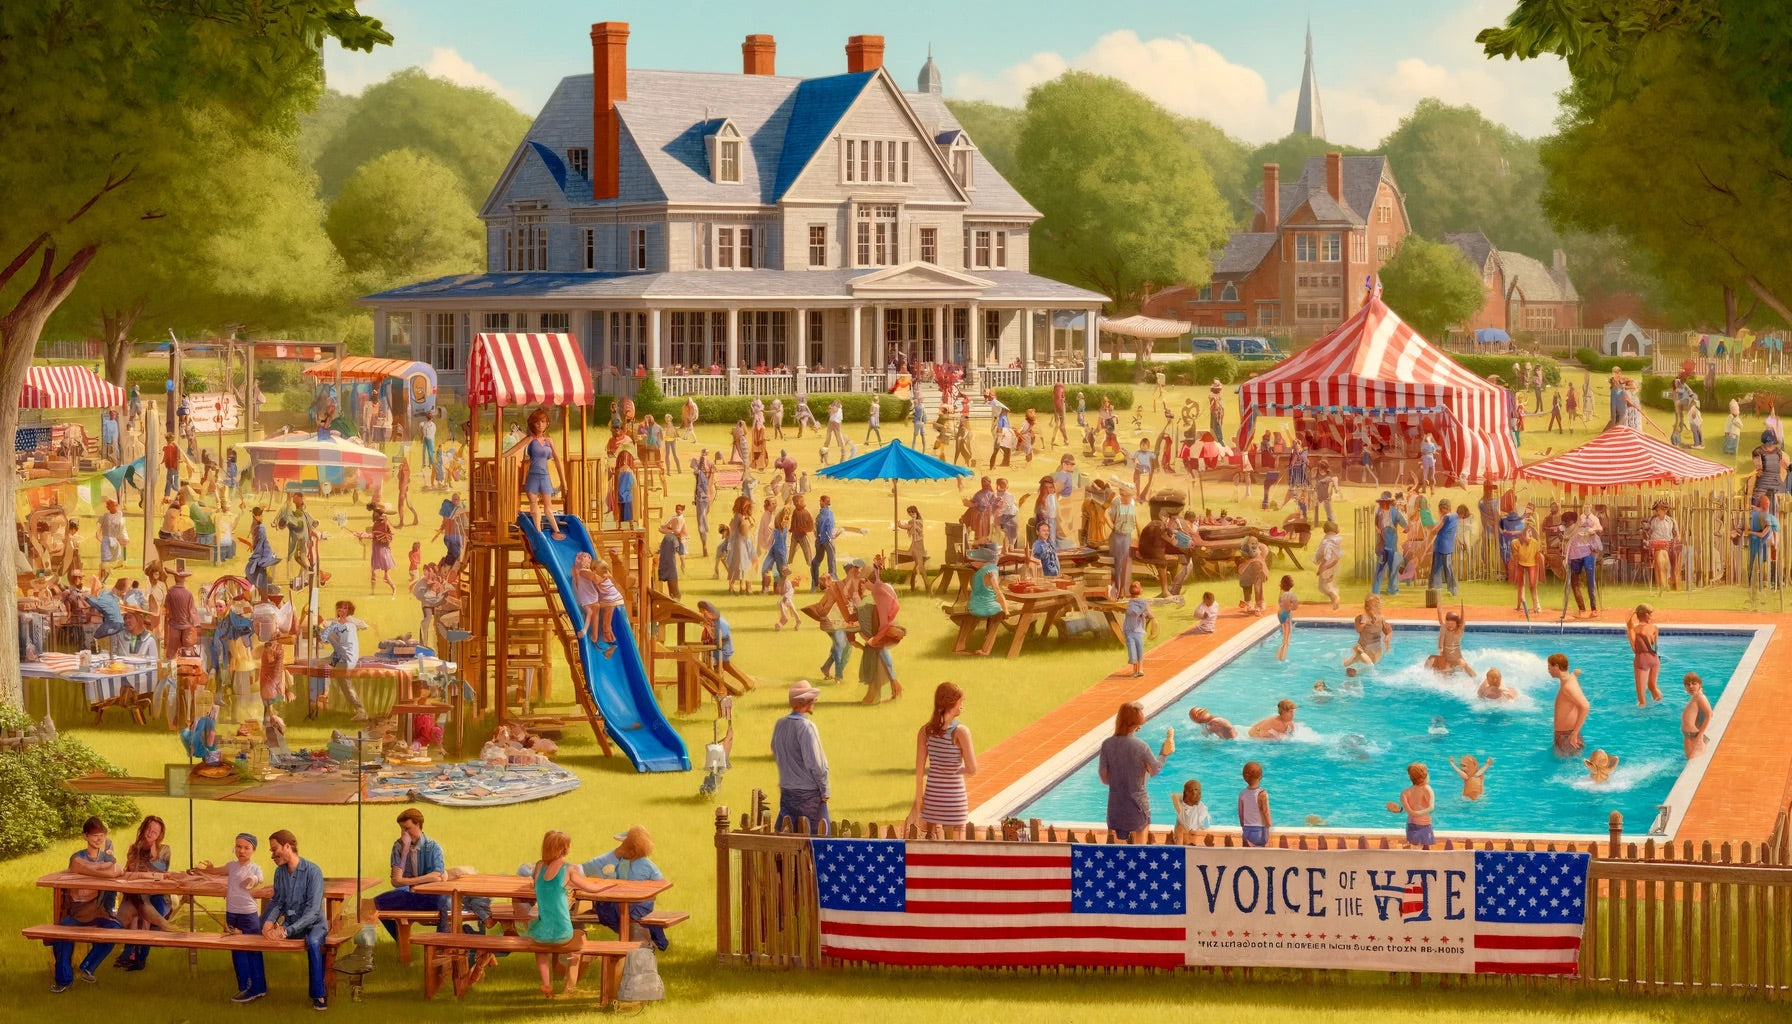 4th of July community celebration at a large historic house with patriotic and eco-friendly "Voice of the Vote" merchandise. The festive event features a pool, playground, food stalls, and numerous families enjoying activities, emphasizing unity and civic engagement.